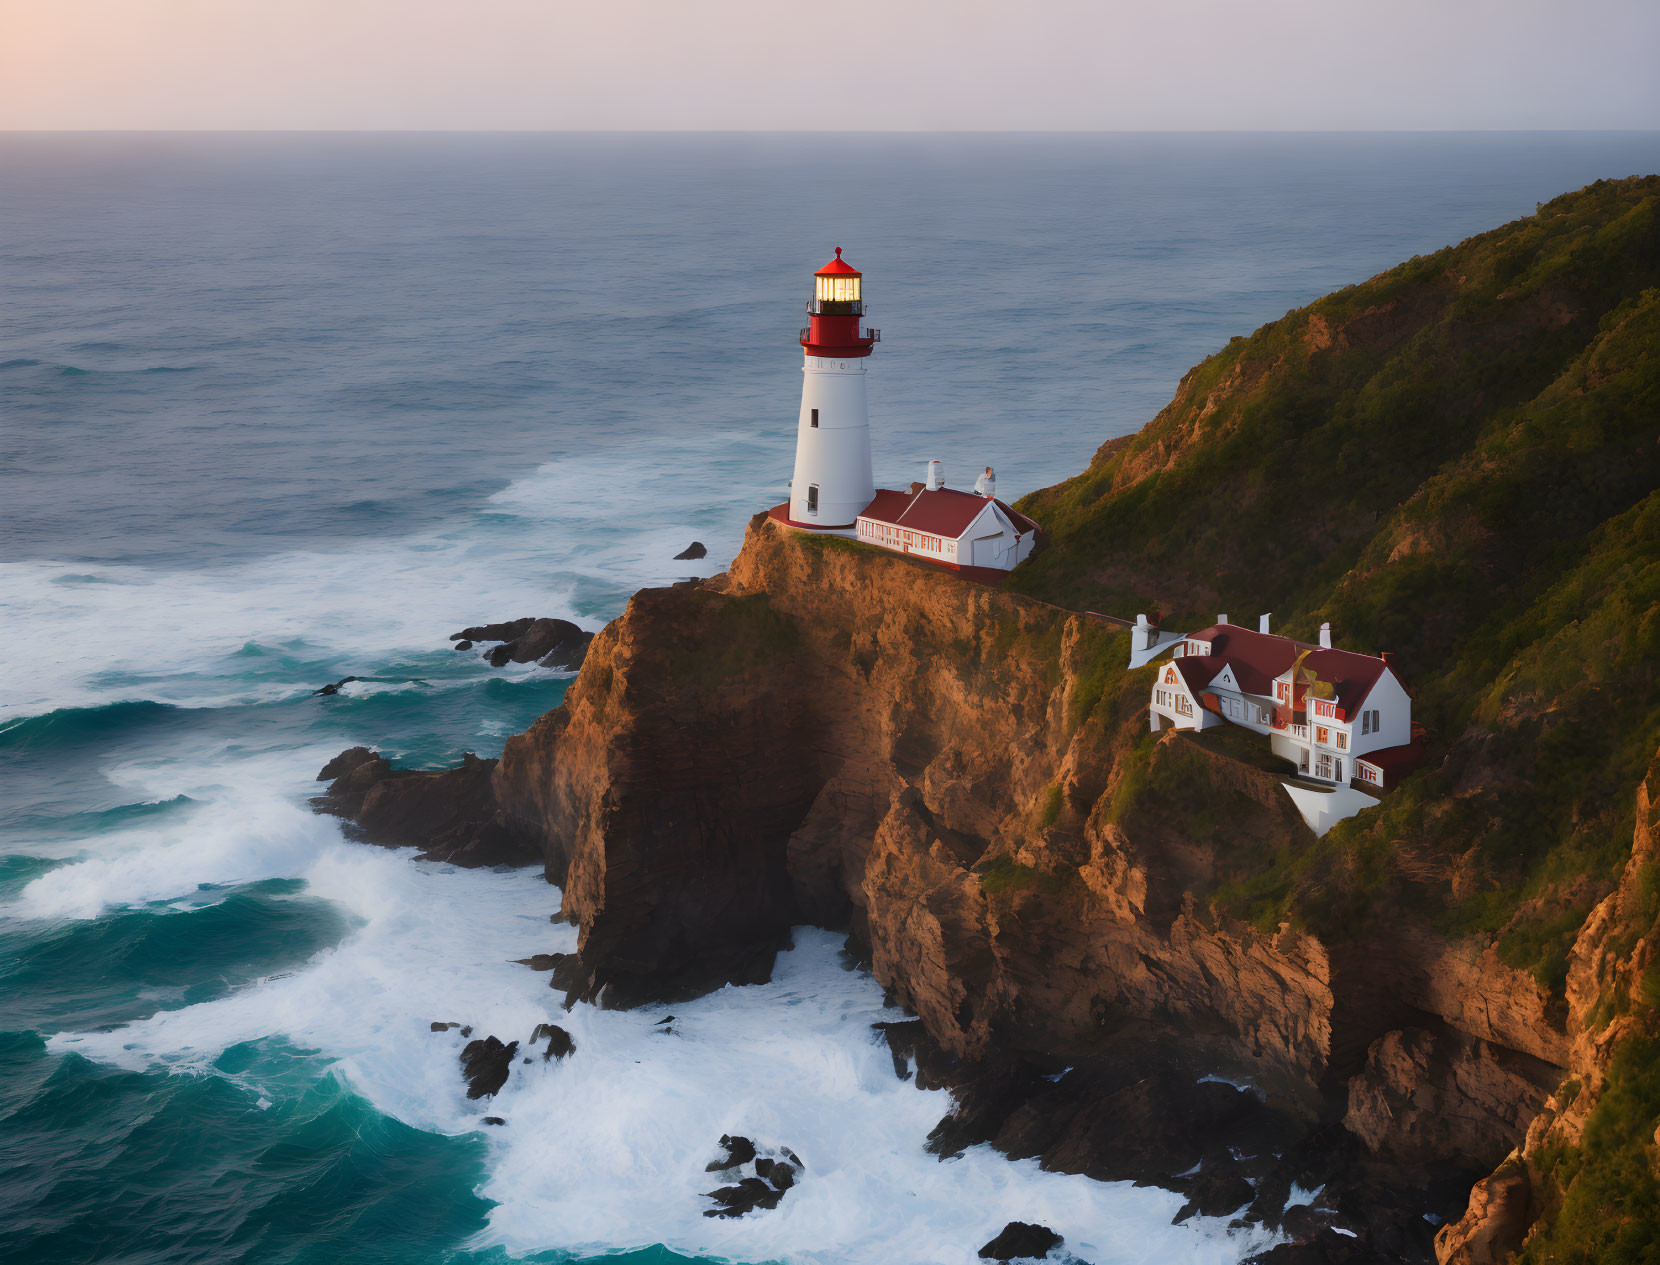 Rugged cliffs lighthouse with red roofed building by stormy sea